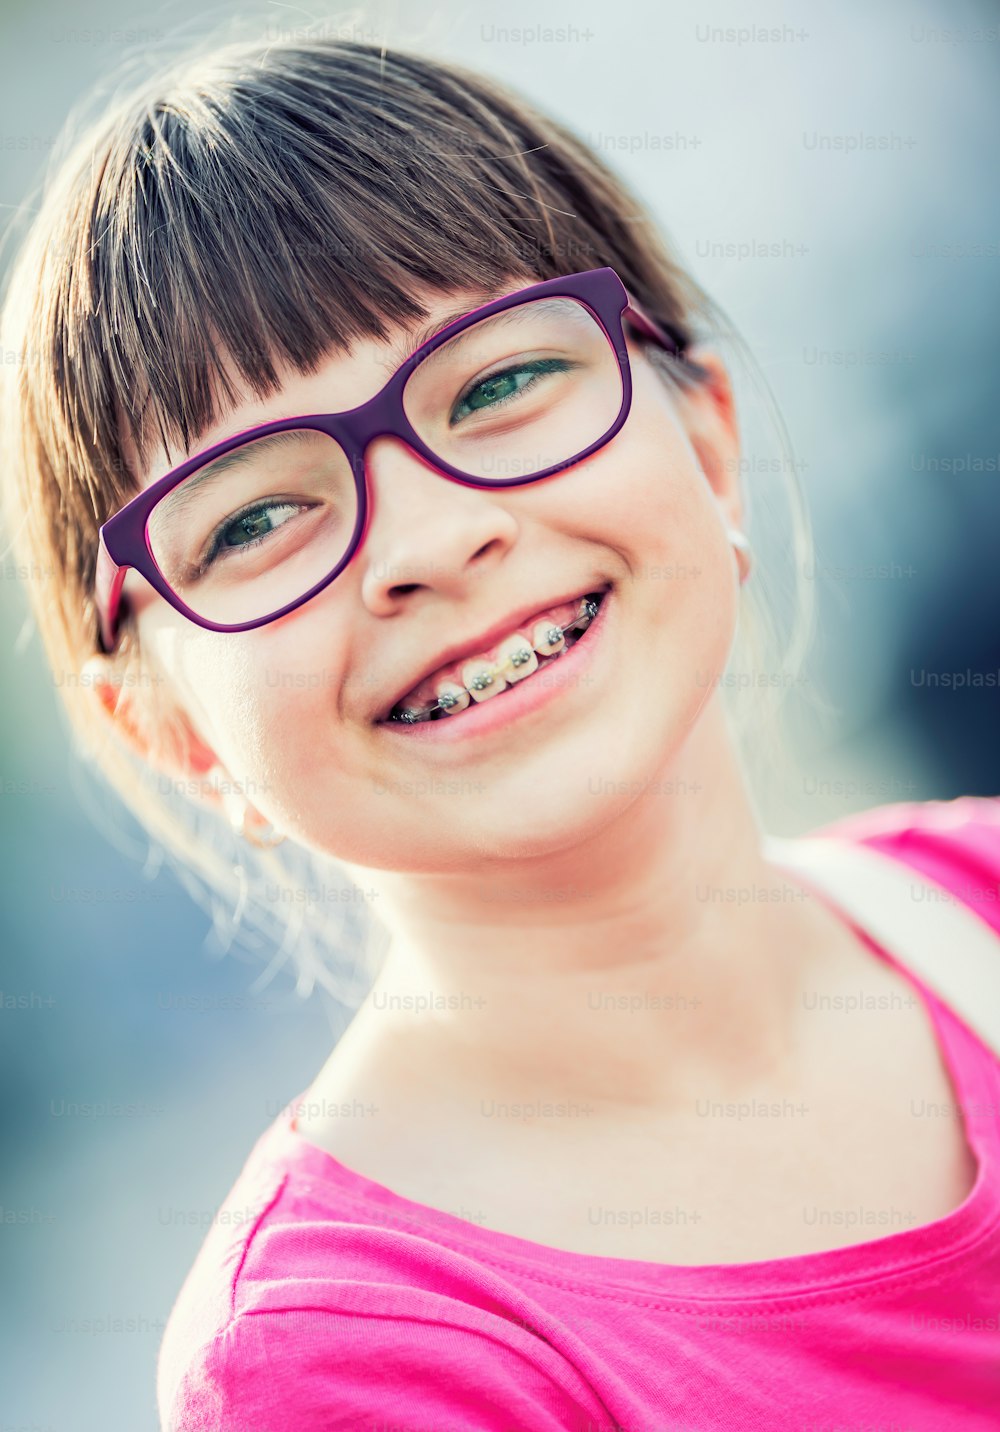 Girl. Teen. Pre teen. Girl with glasses. Girl with teeth braces. Young cute caucasian blond girl wearing teeth braces and glasses.